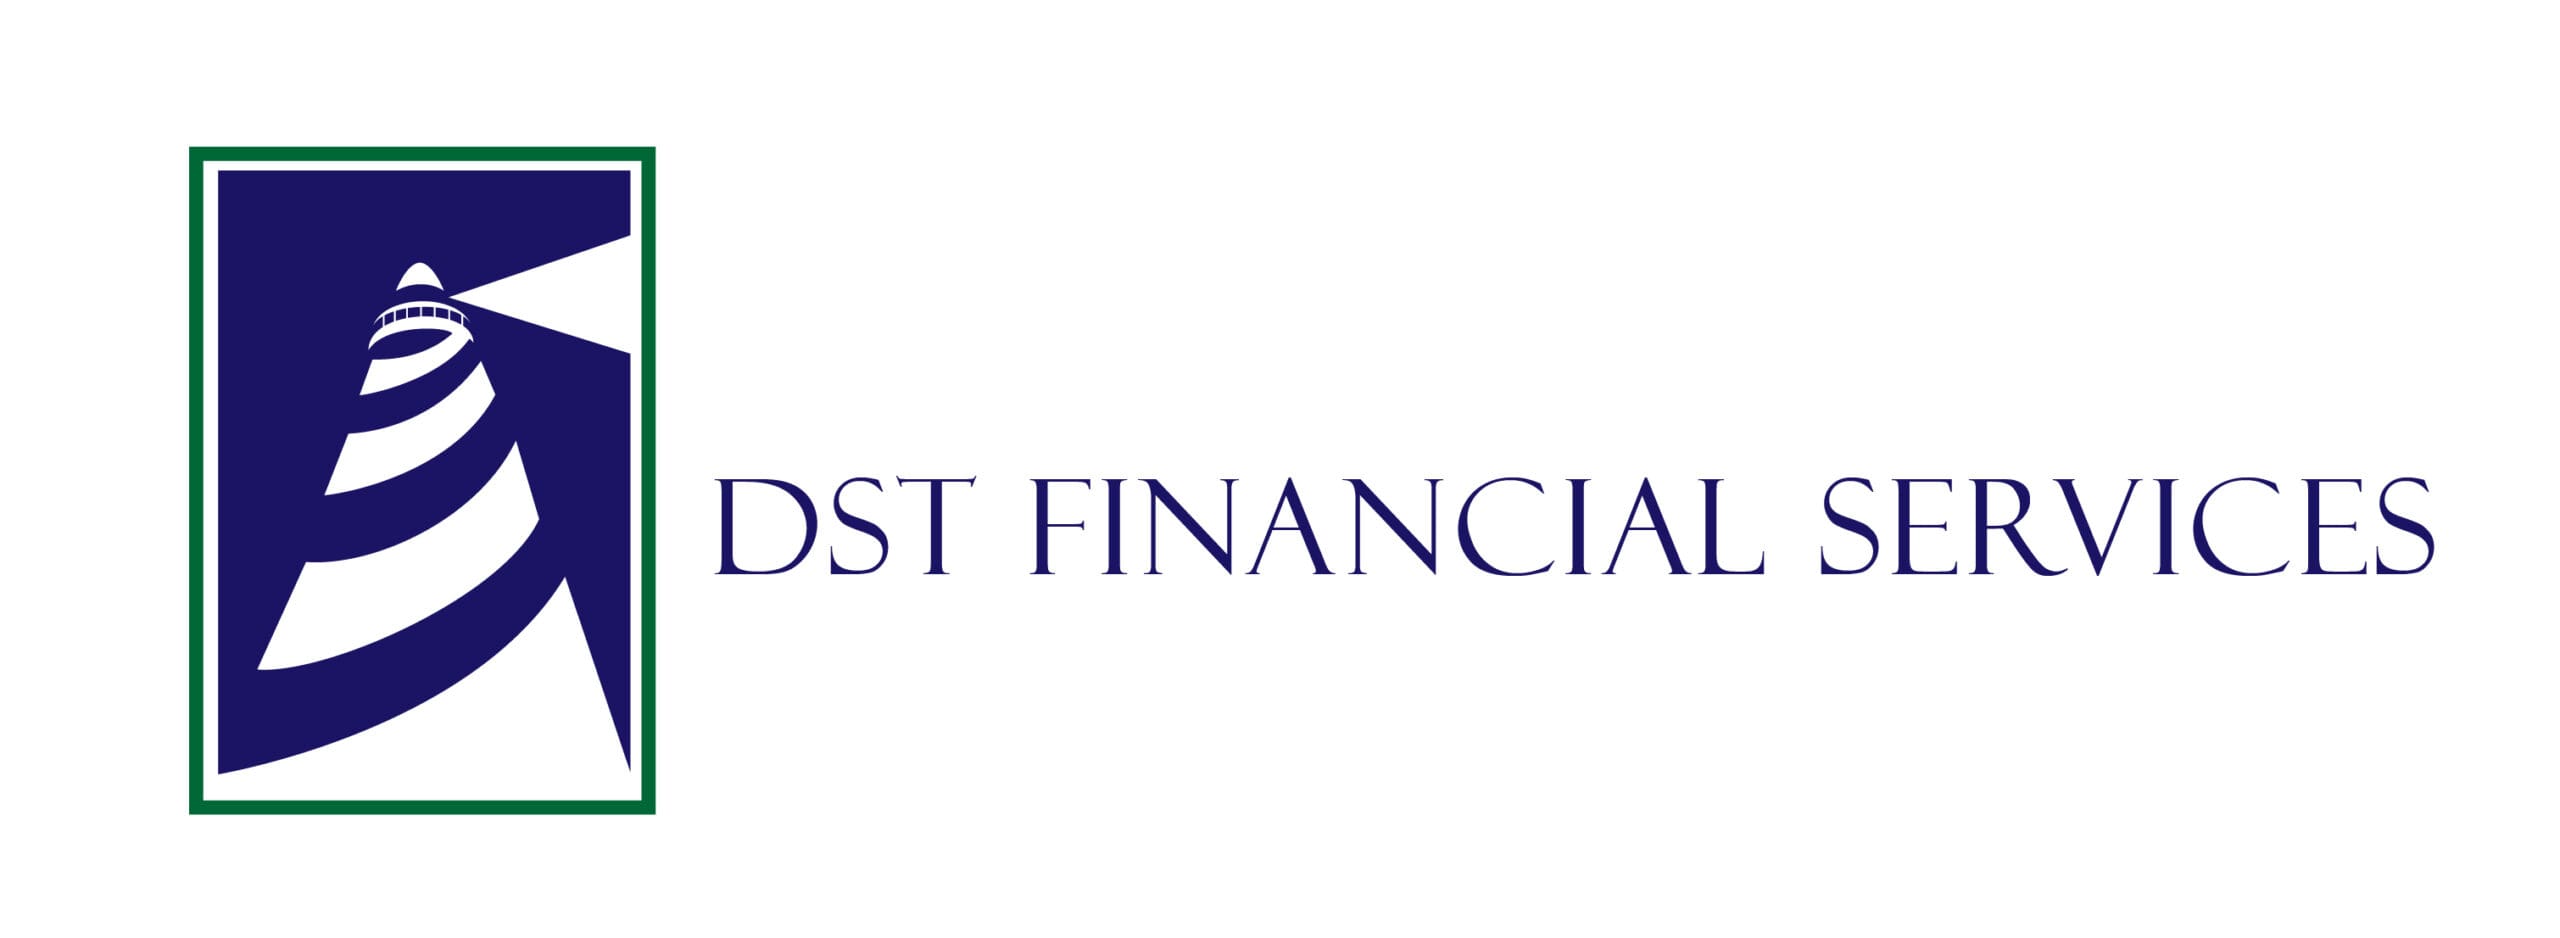 DST Financial Services